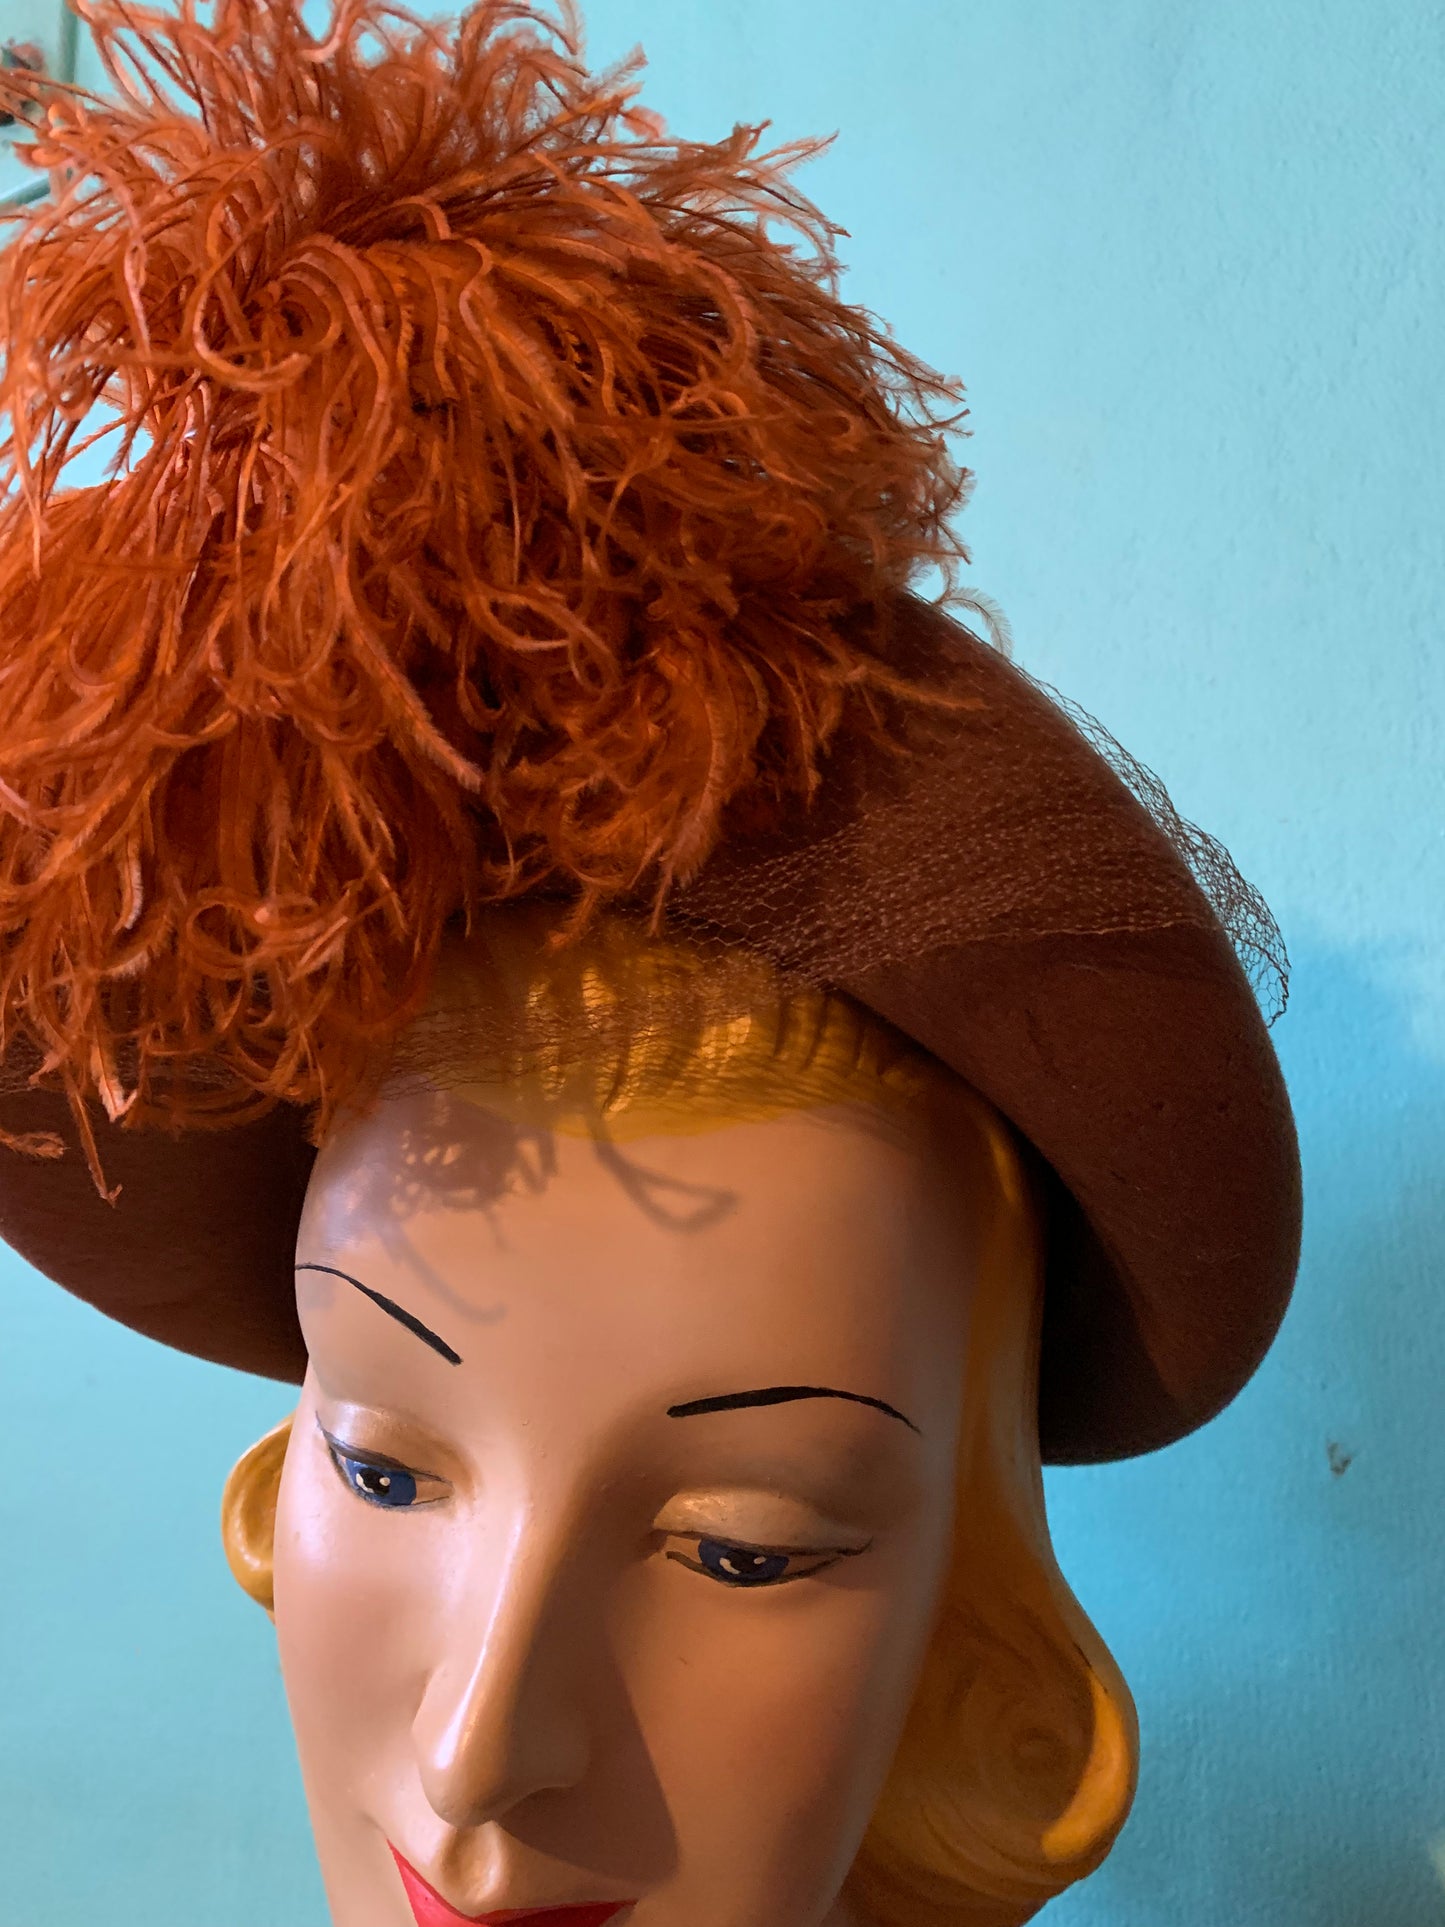 Cinnamon and Tangerine Dramatically Plumed Felted Hat circa 1940s